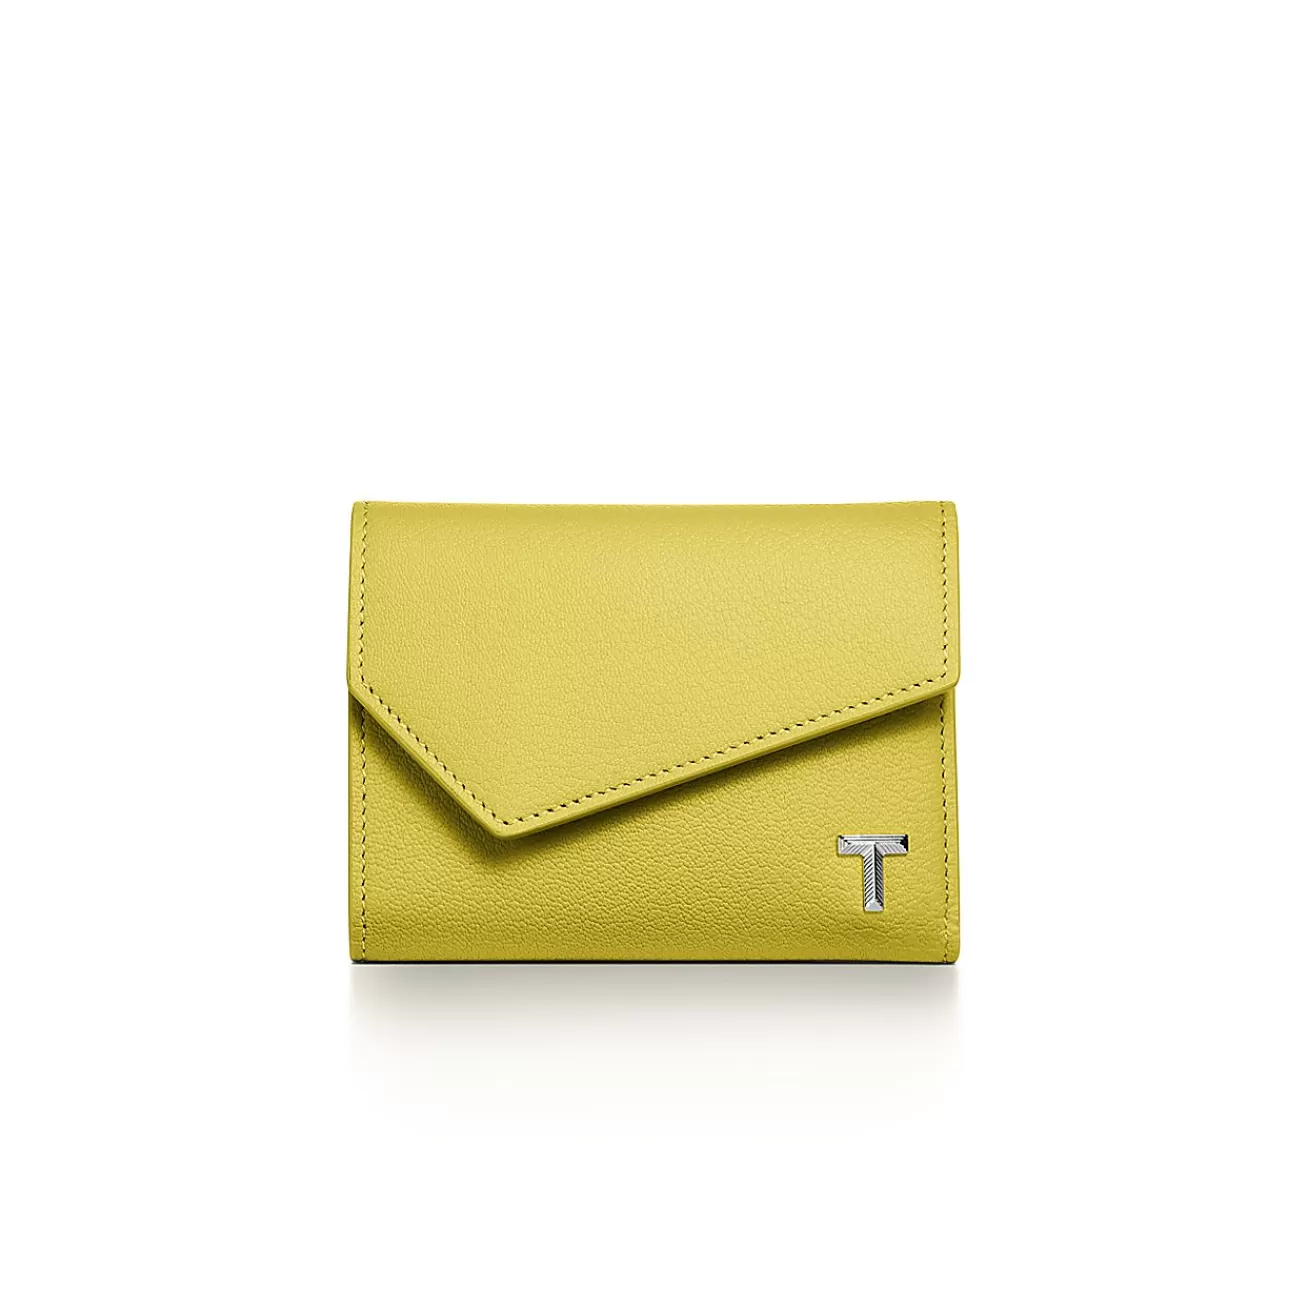 Tiffany & Co. Tiffany T Wallet in Citrine Yellow Leather | ^Women Small Leather Goods | Women's Accessories